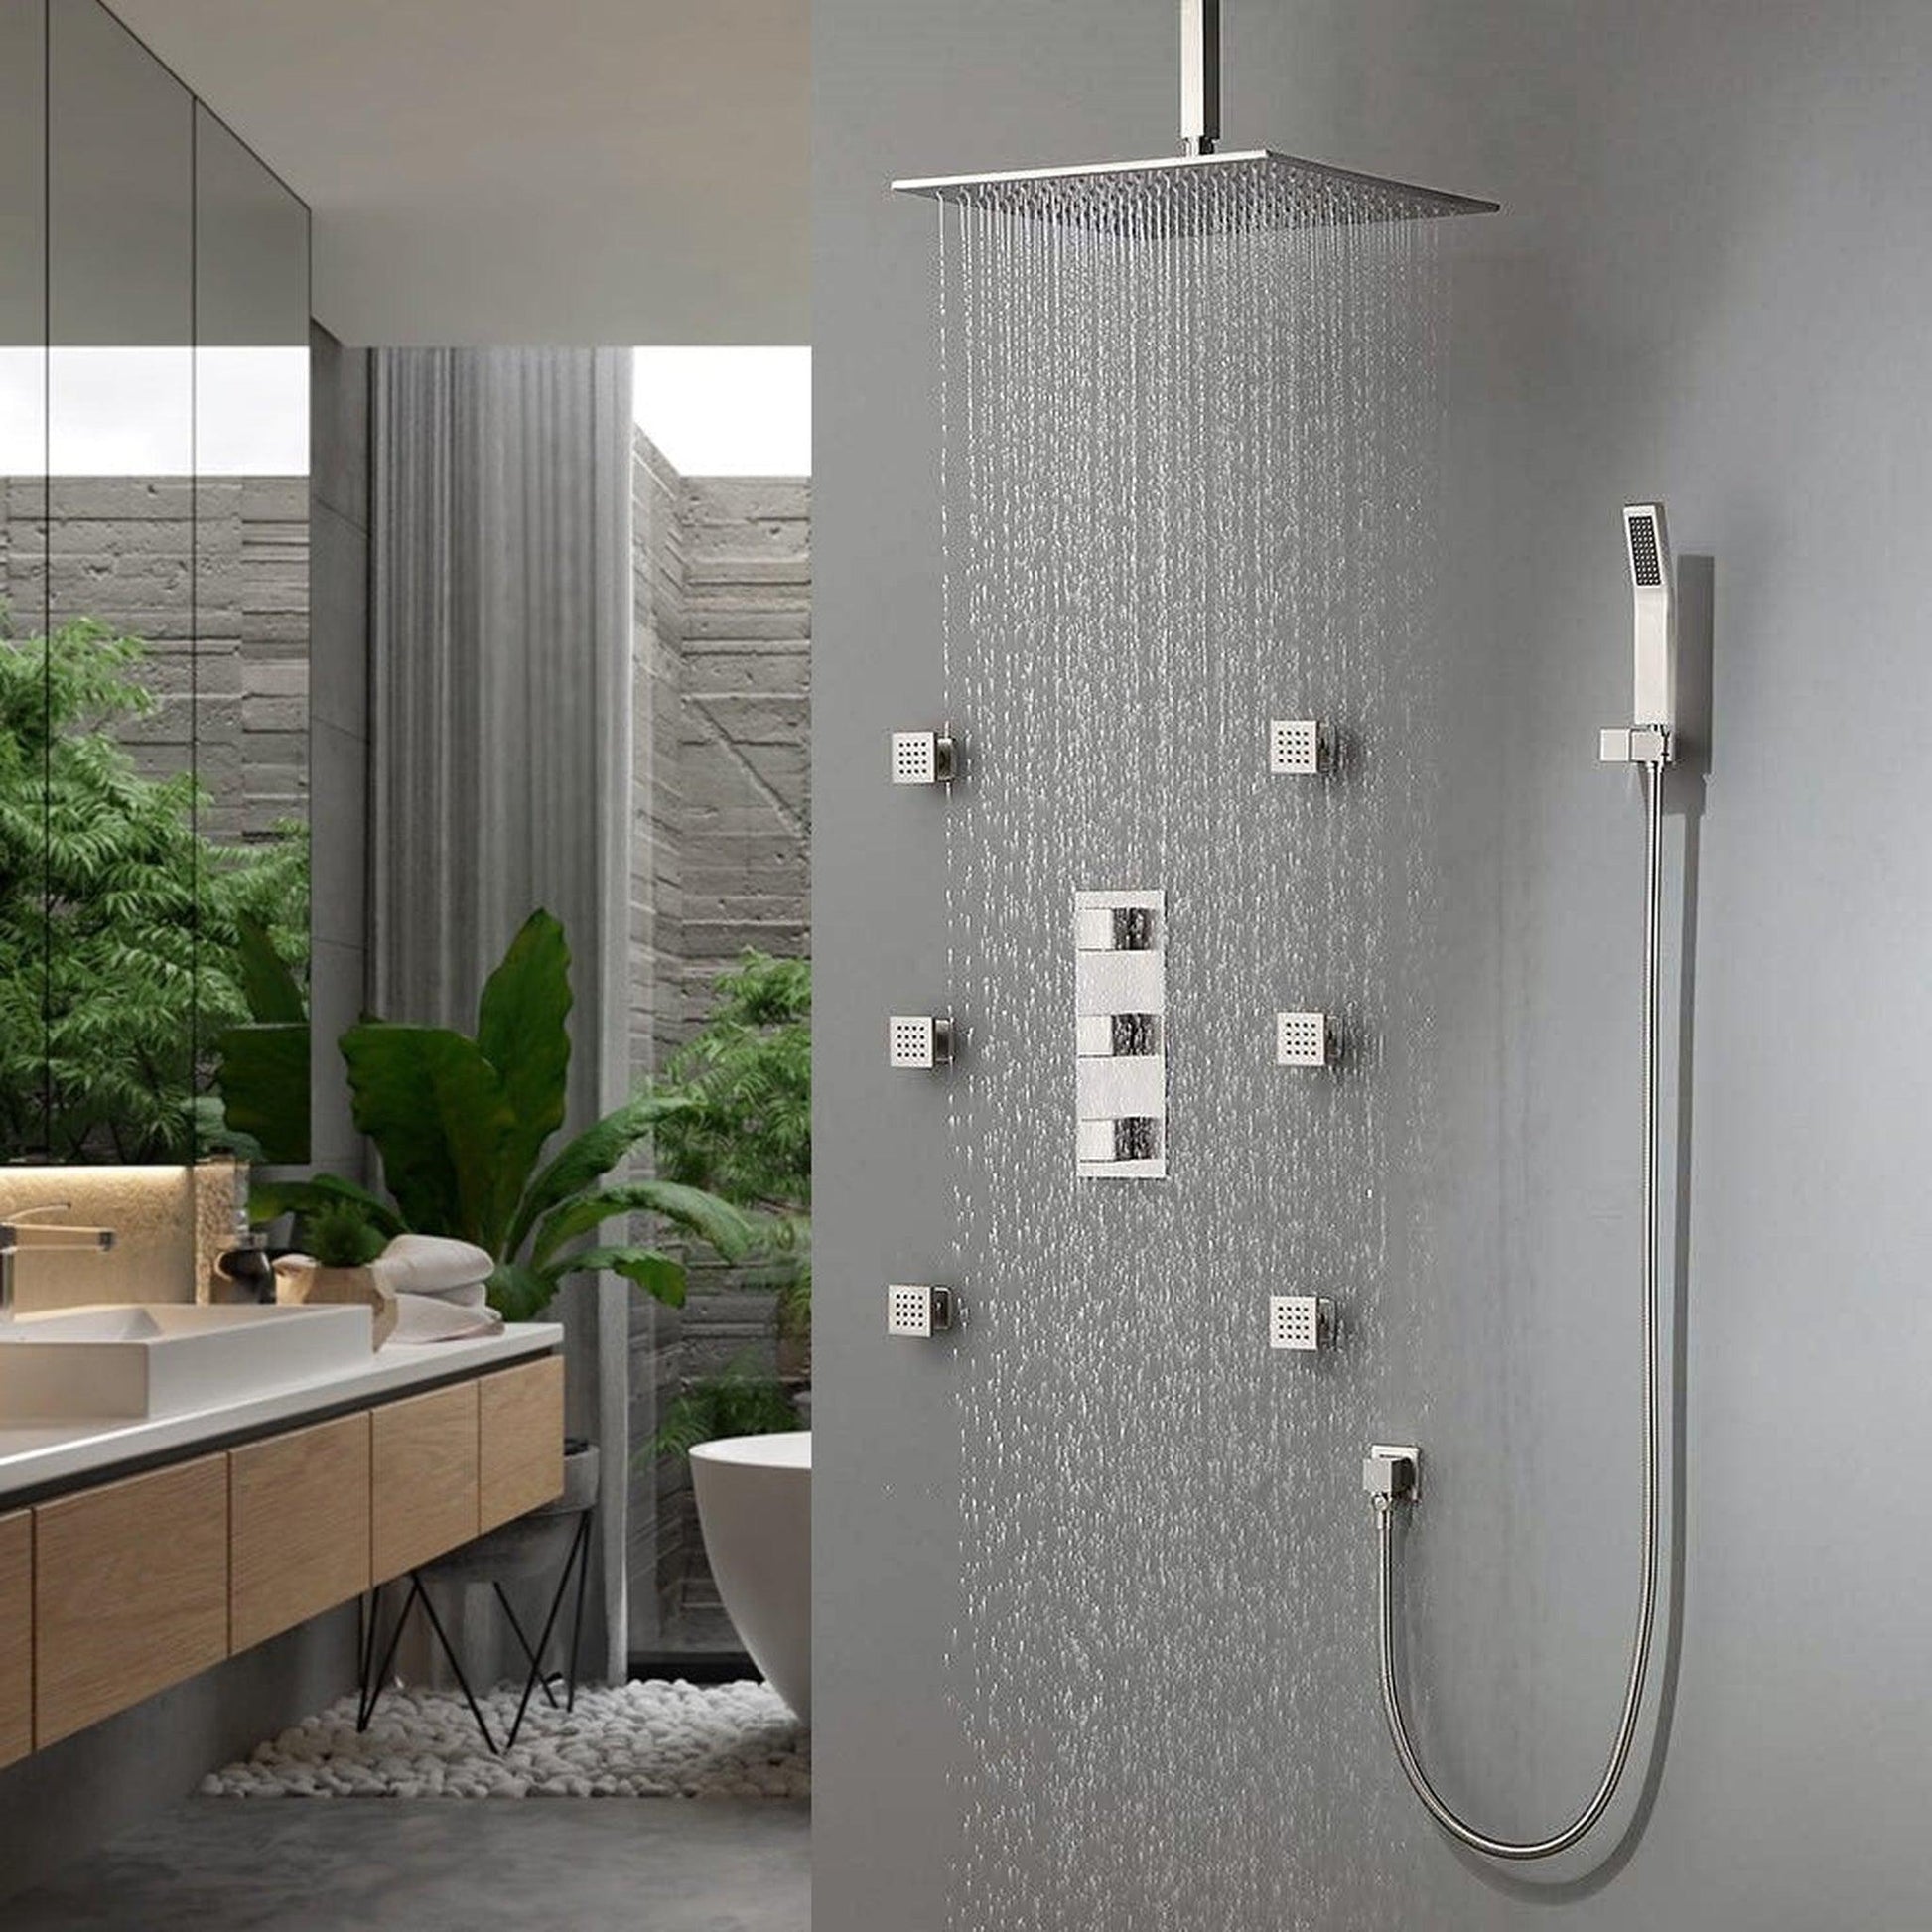 Fontana 8" Chrome Square Ceiling Mounted Thermostatic Rainfall Shower Set With 6-Jet Body Sprays and Hand Shower